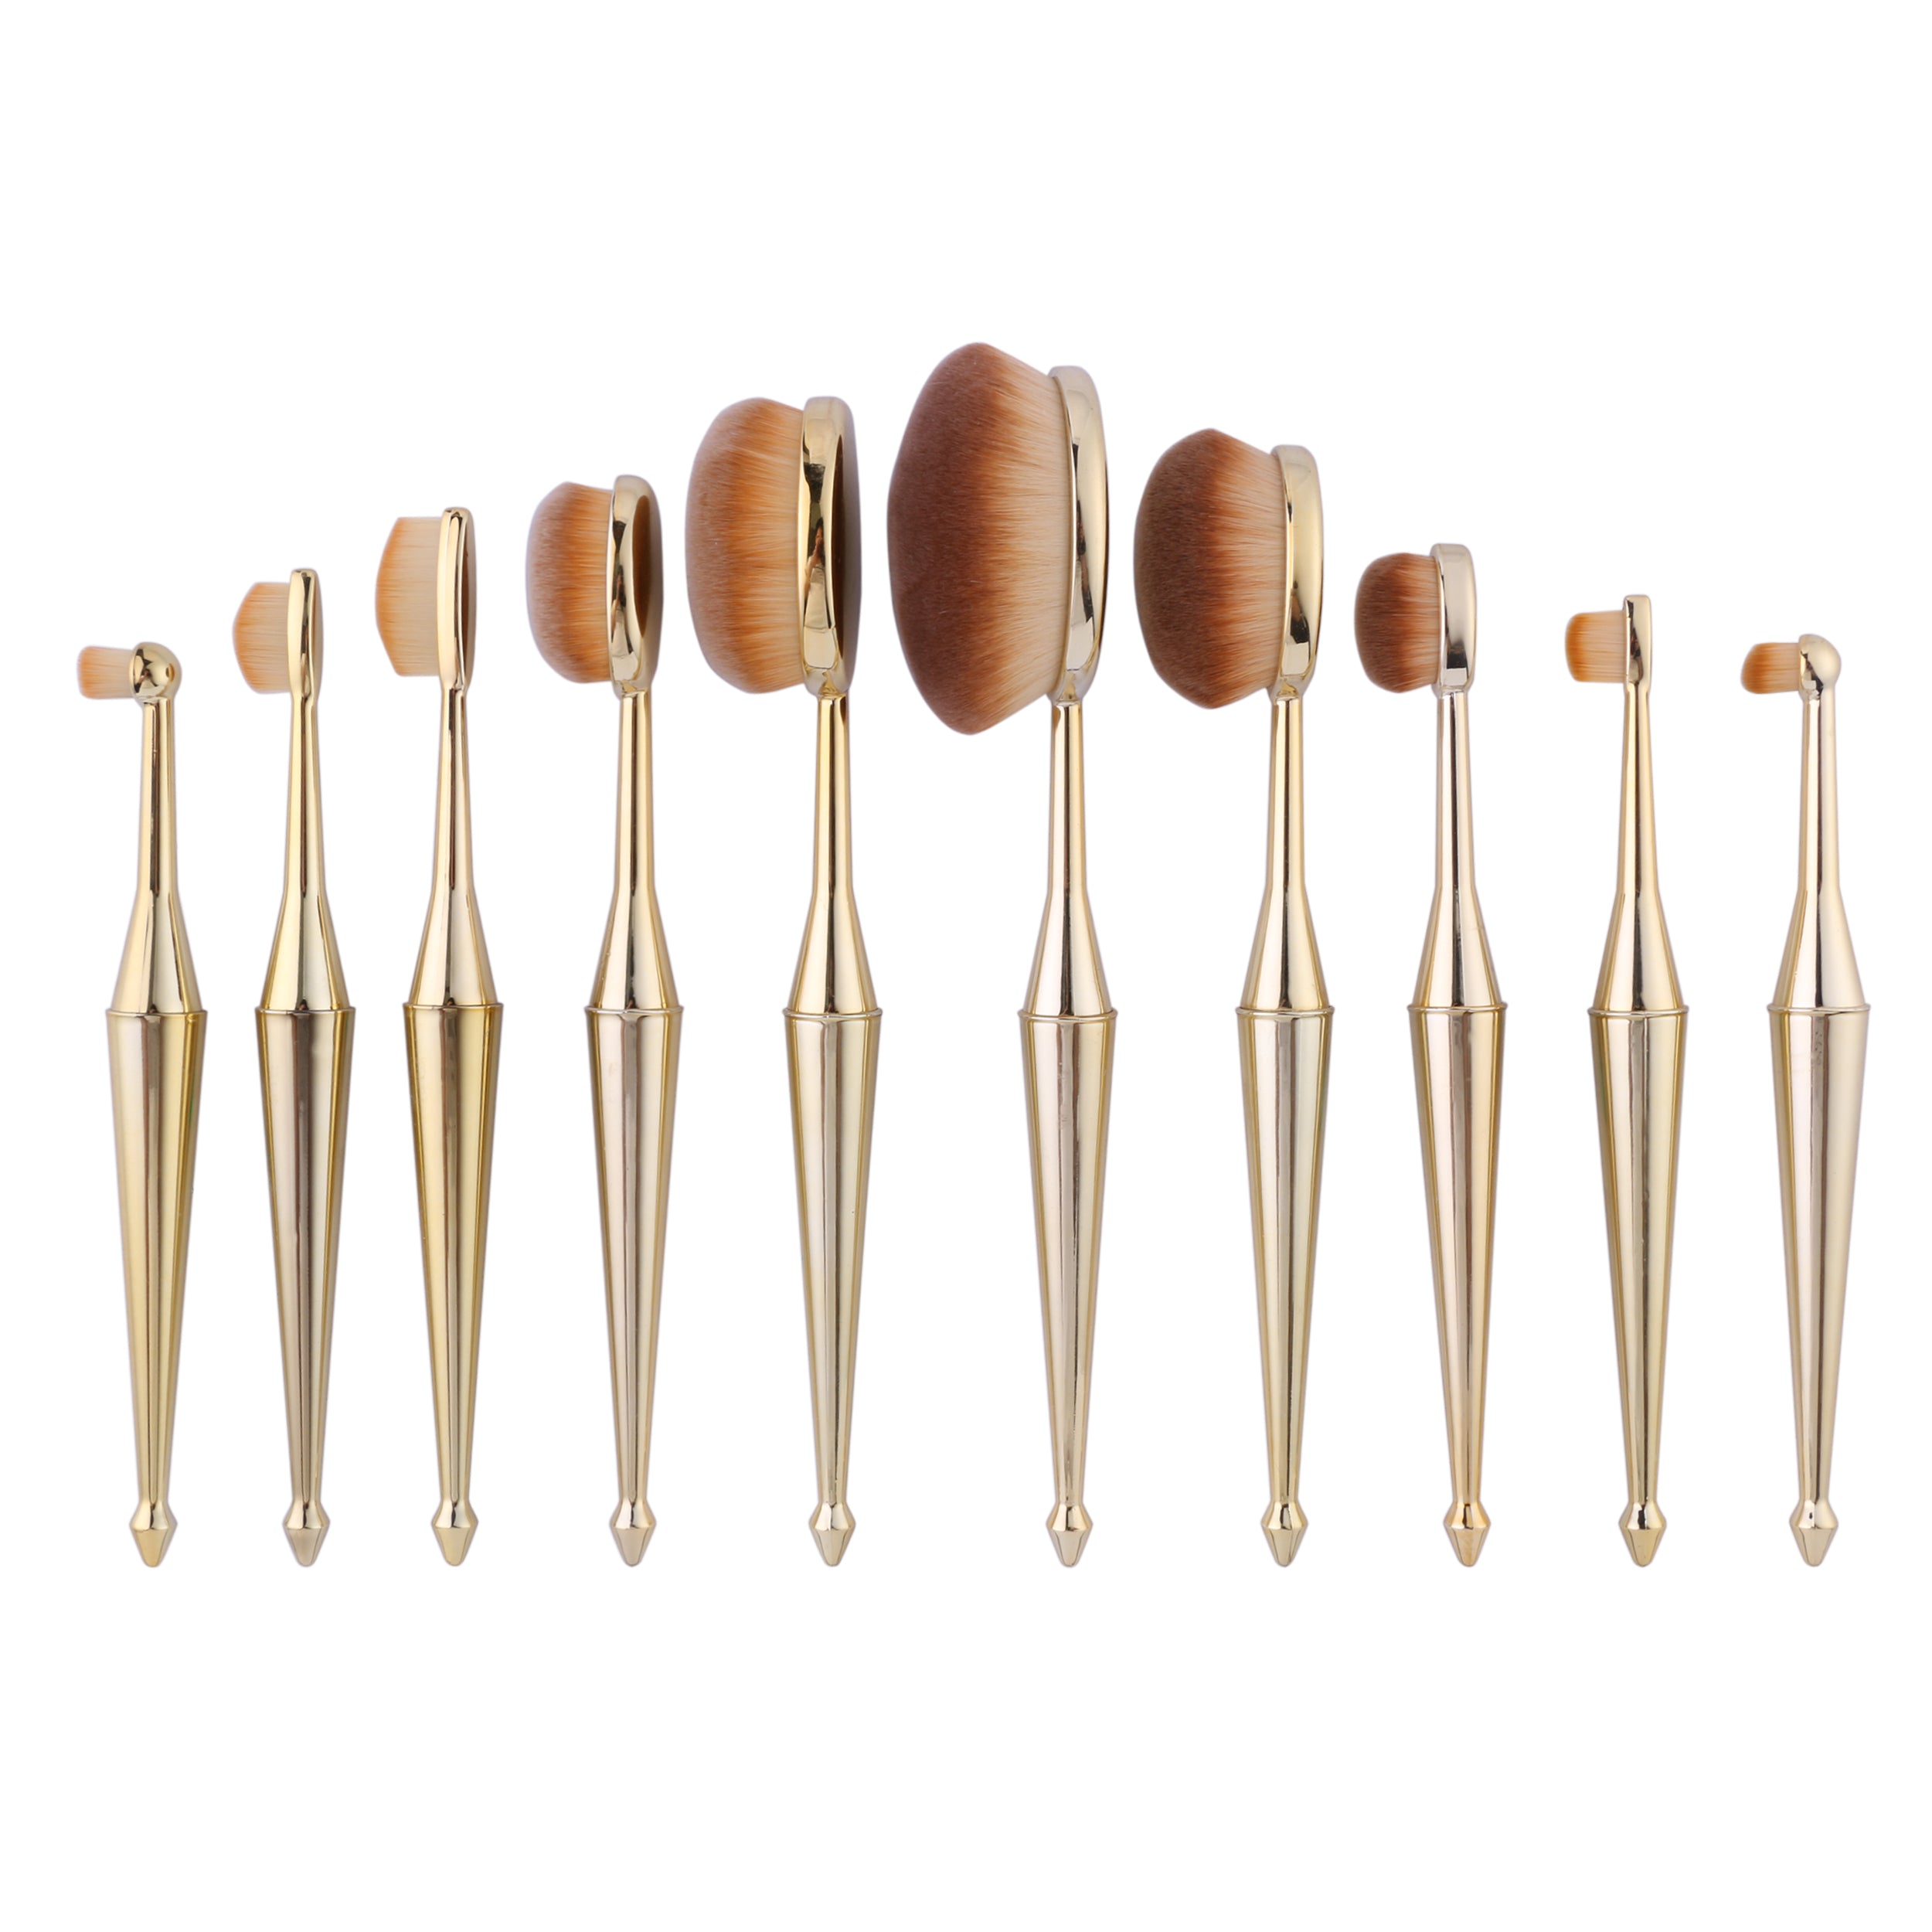 Up To 84% Off on Metallic Oval Makeup Brush Se